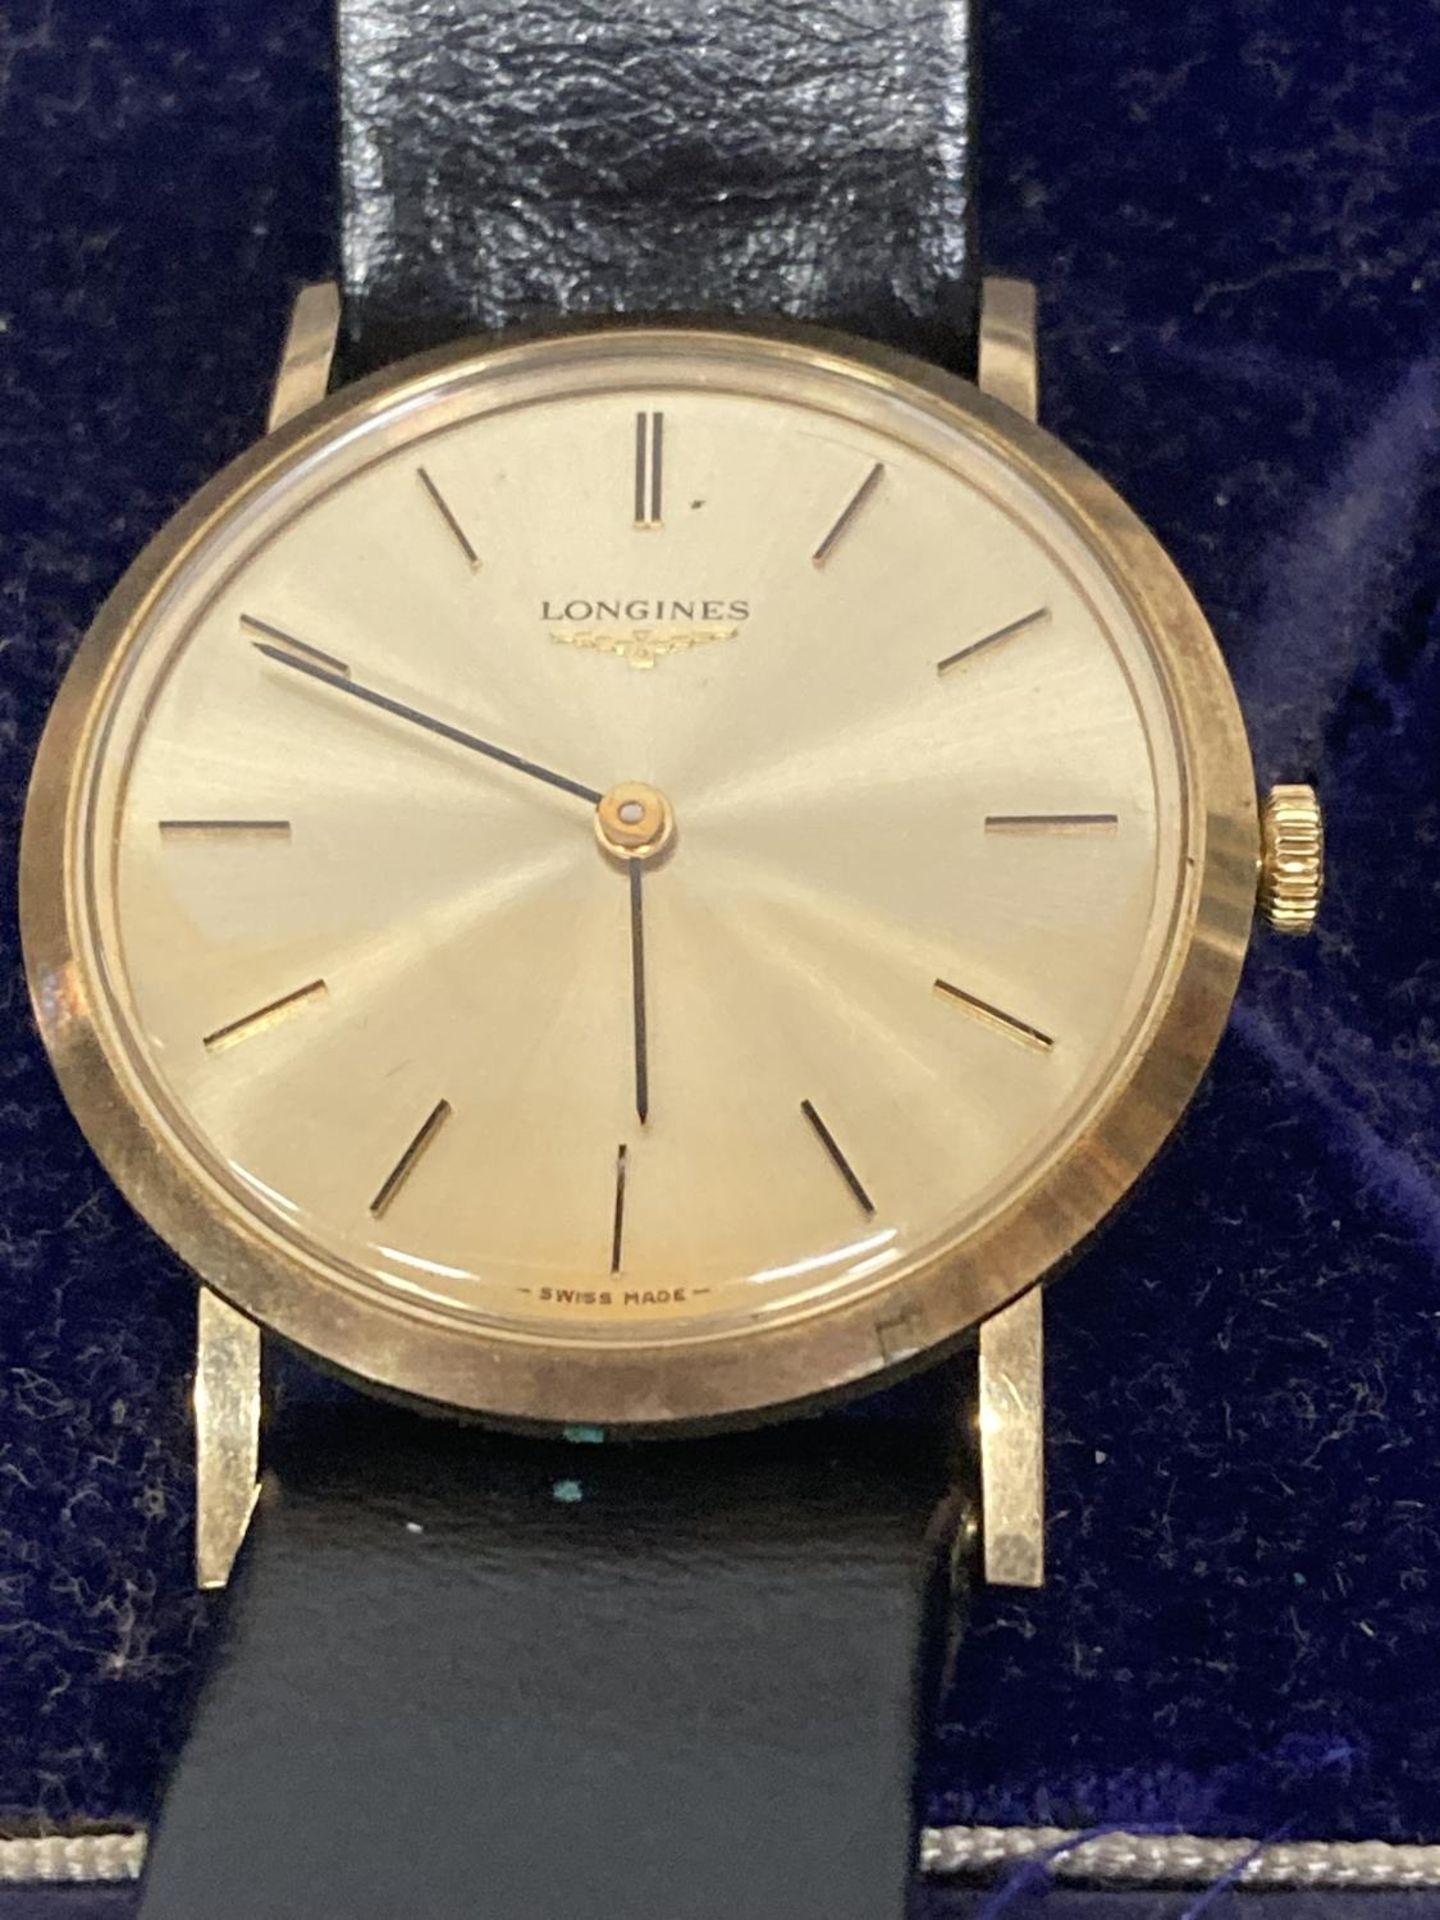 A VINTAGE LONGINES GENTLEMAN'S WRIST WATCH WITH 9 CARAT GOLD CASE, GOLD DIAL AND ORIGINAL CASE - Image 2 of 4